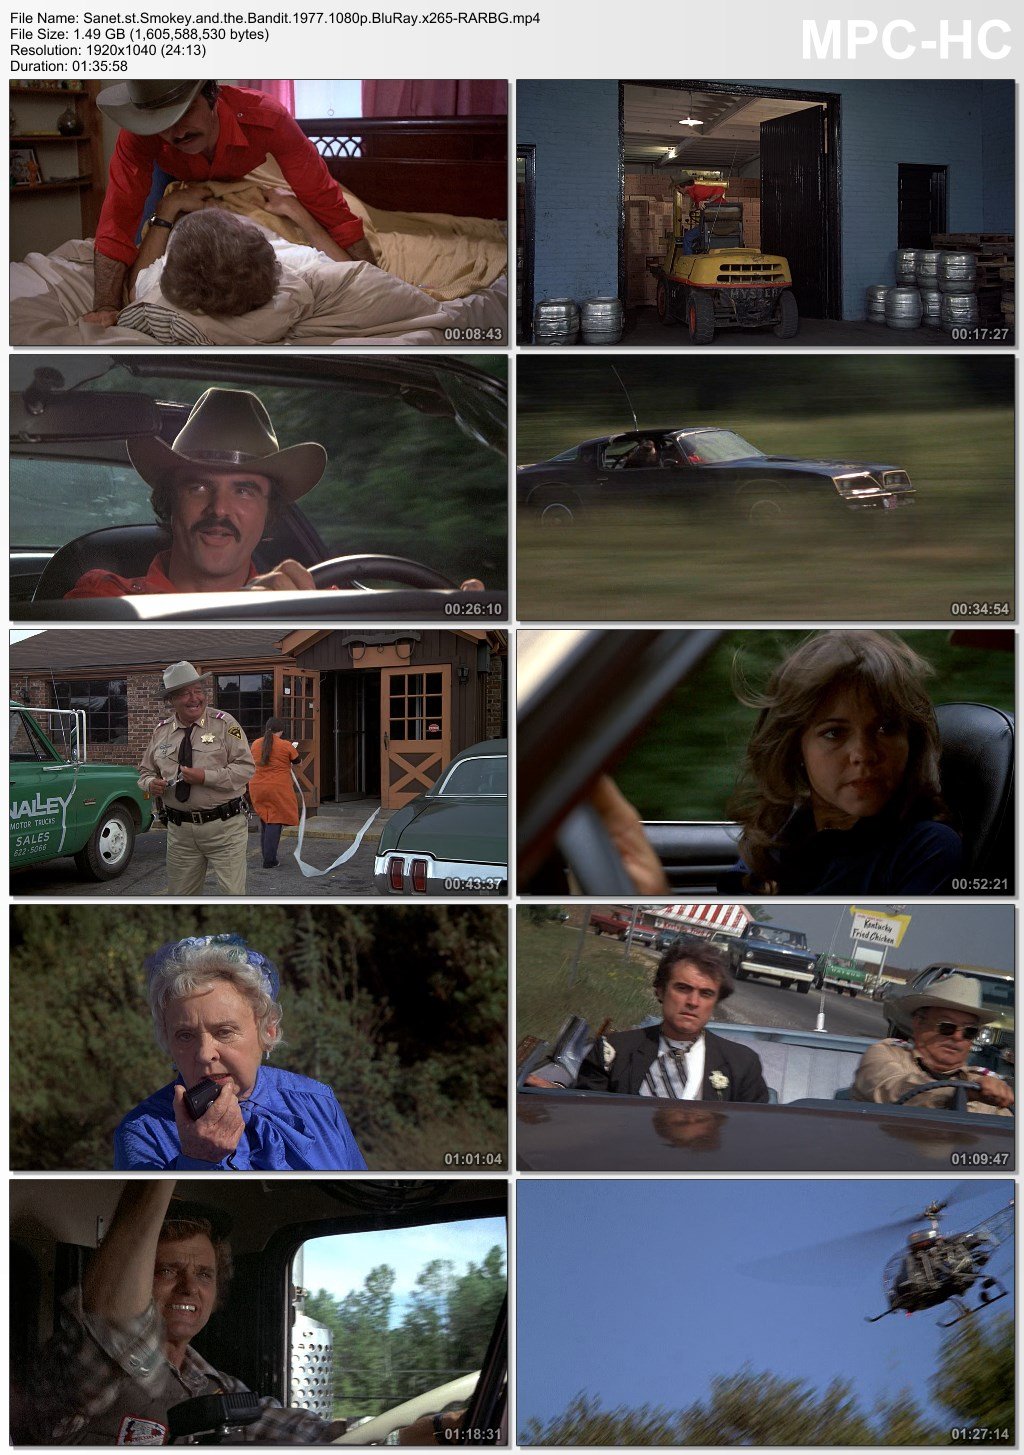 the cast of the smokey and the bandit movies